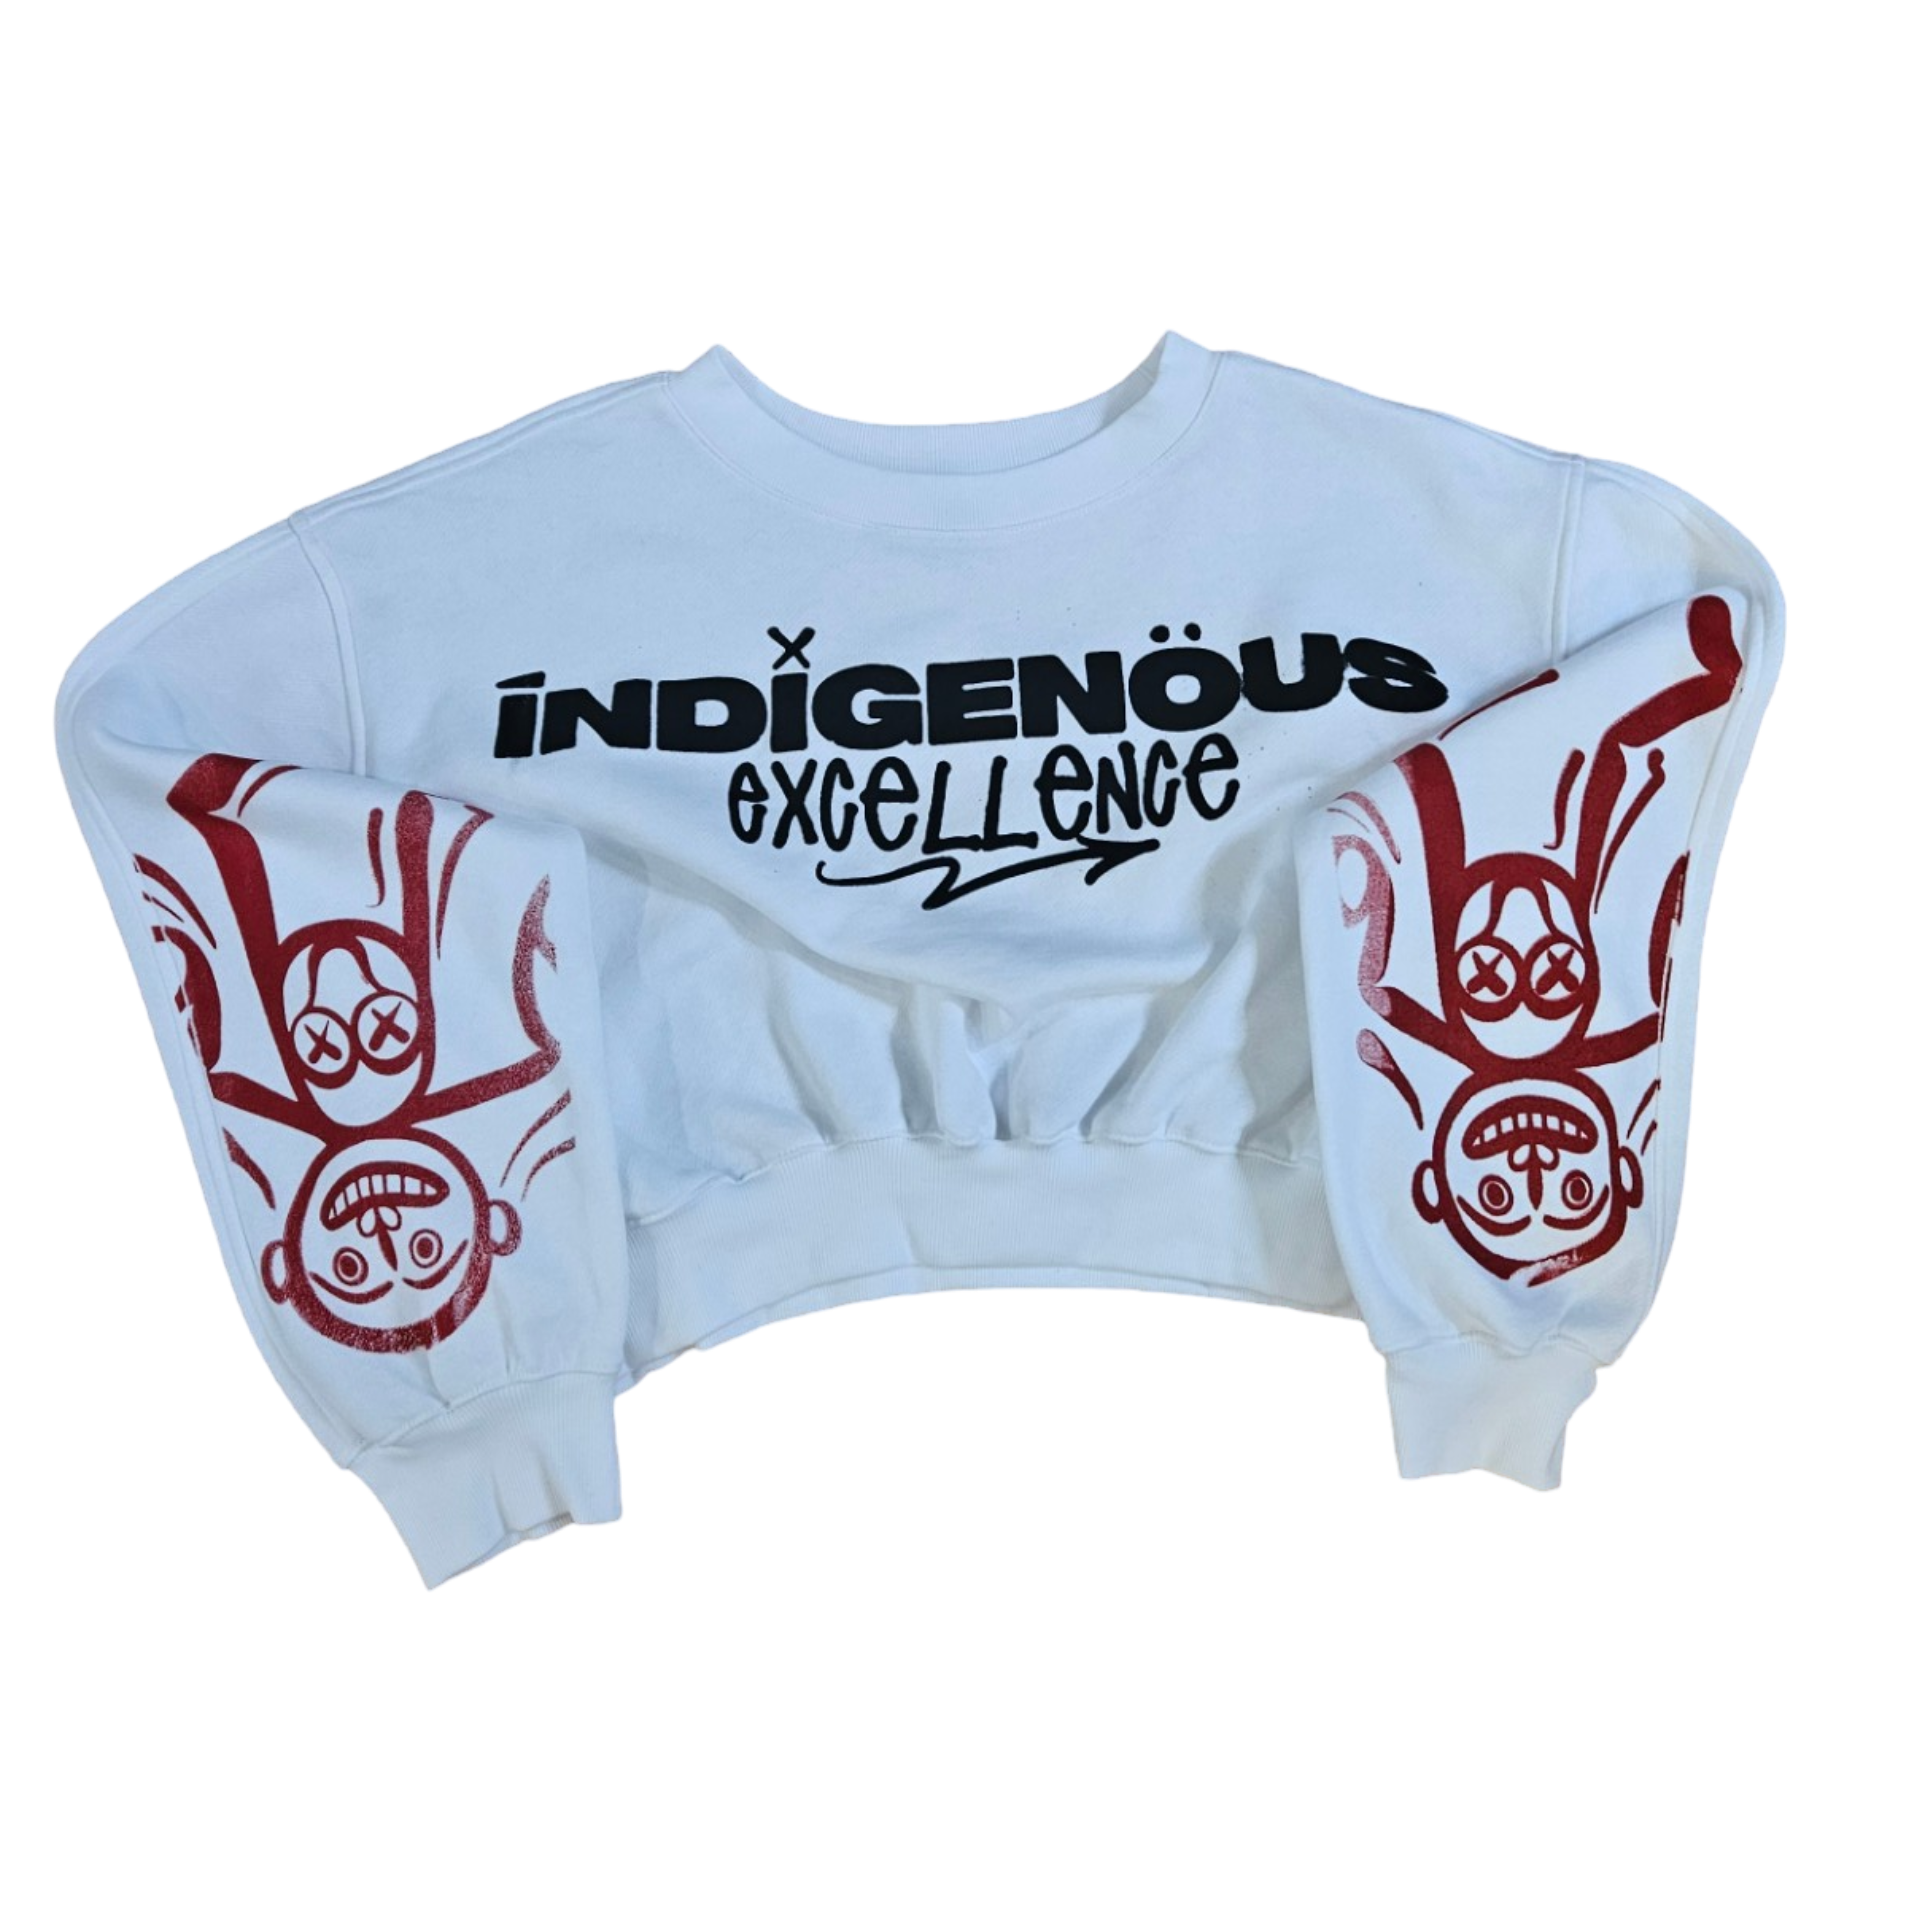 The indigenous excellence woman's cropped crew (woman's size Medium)